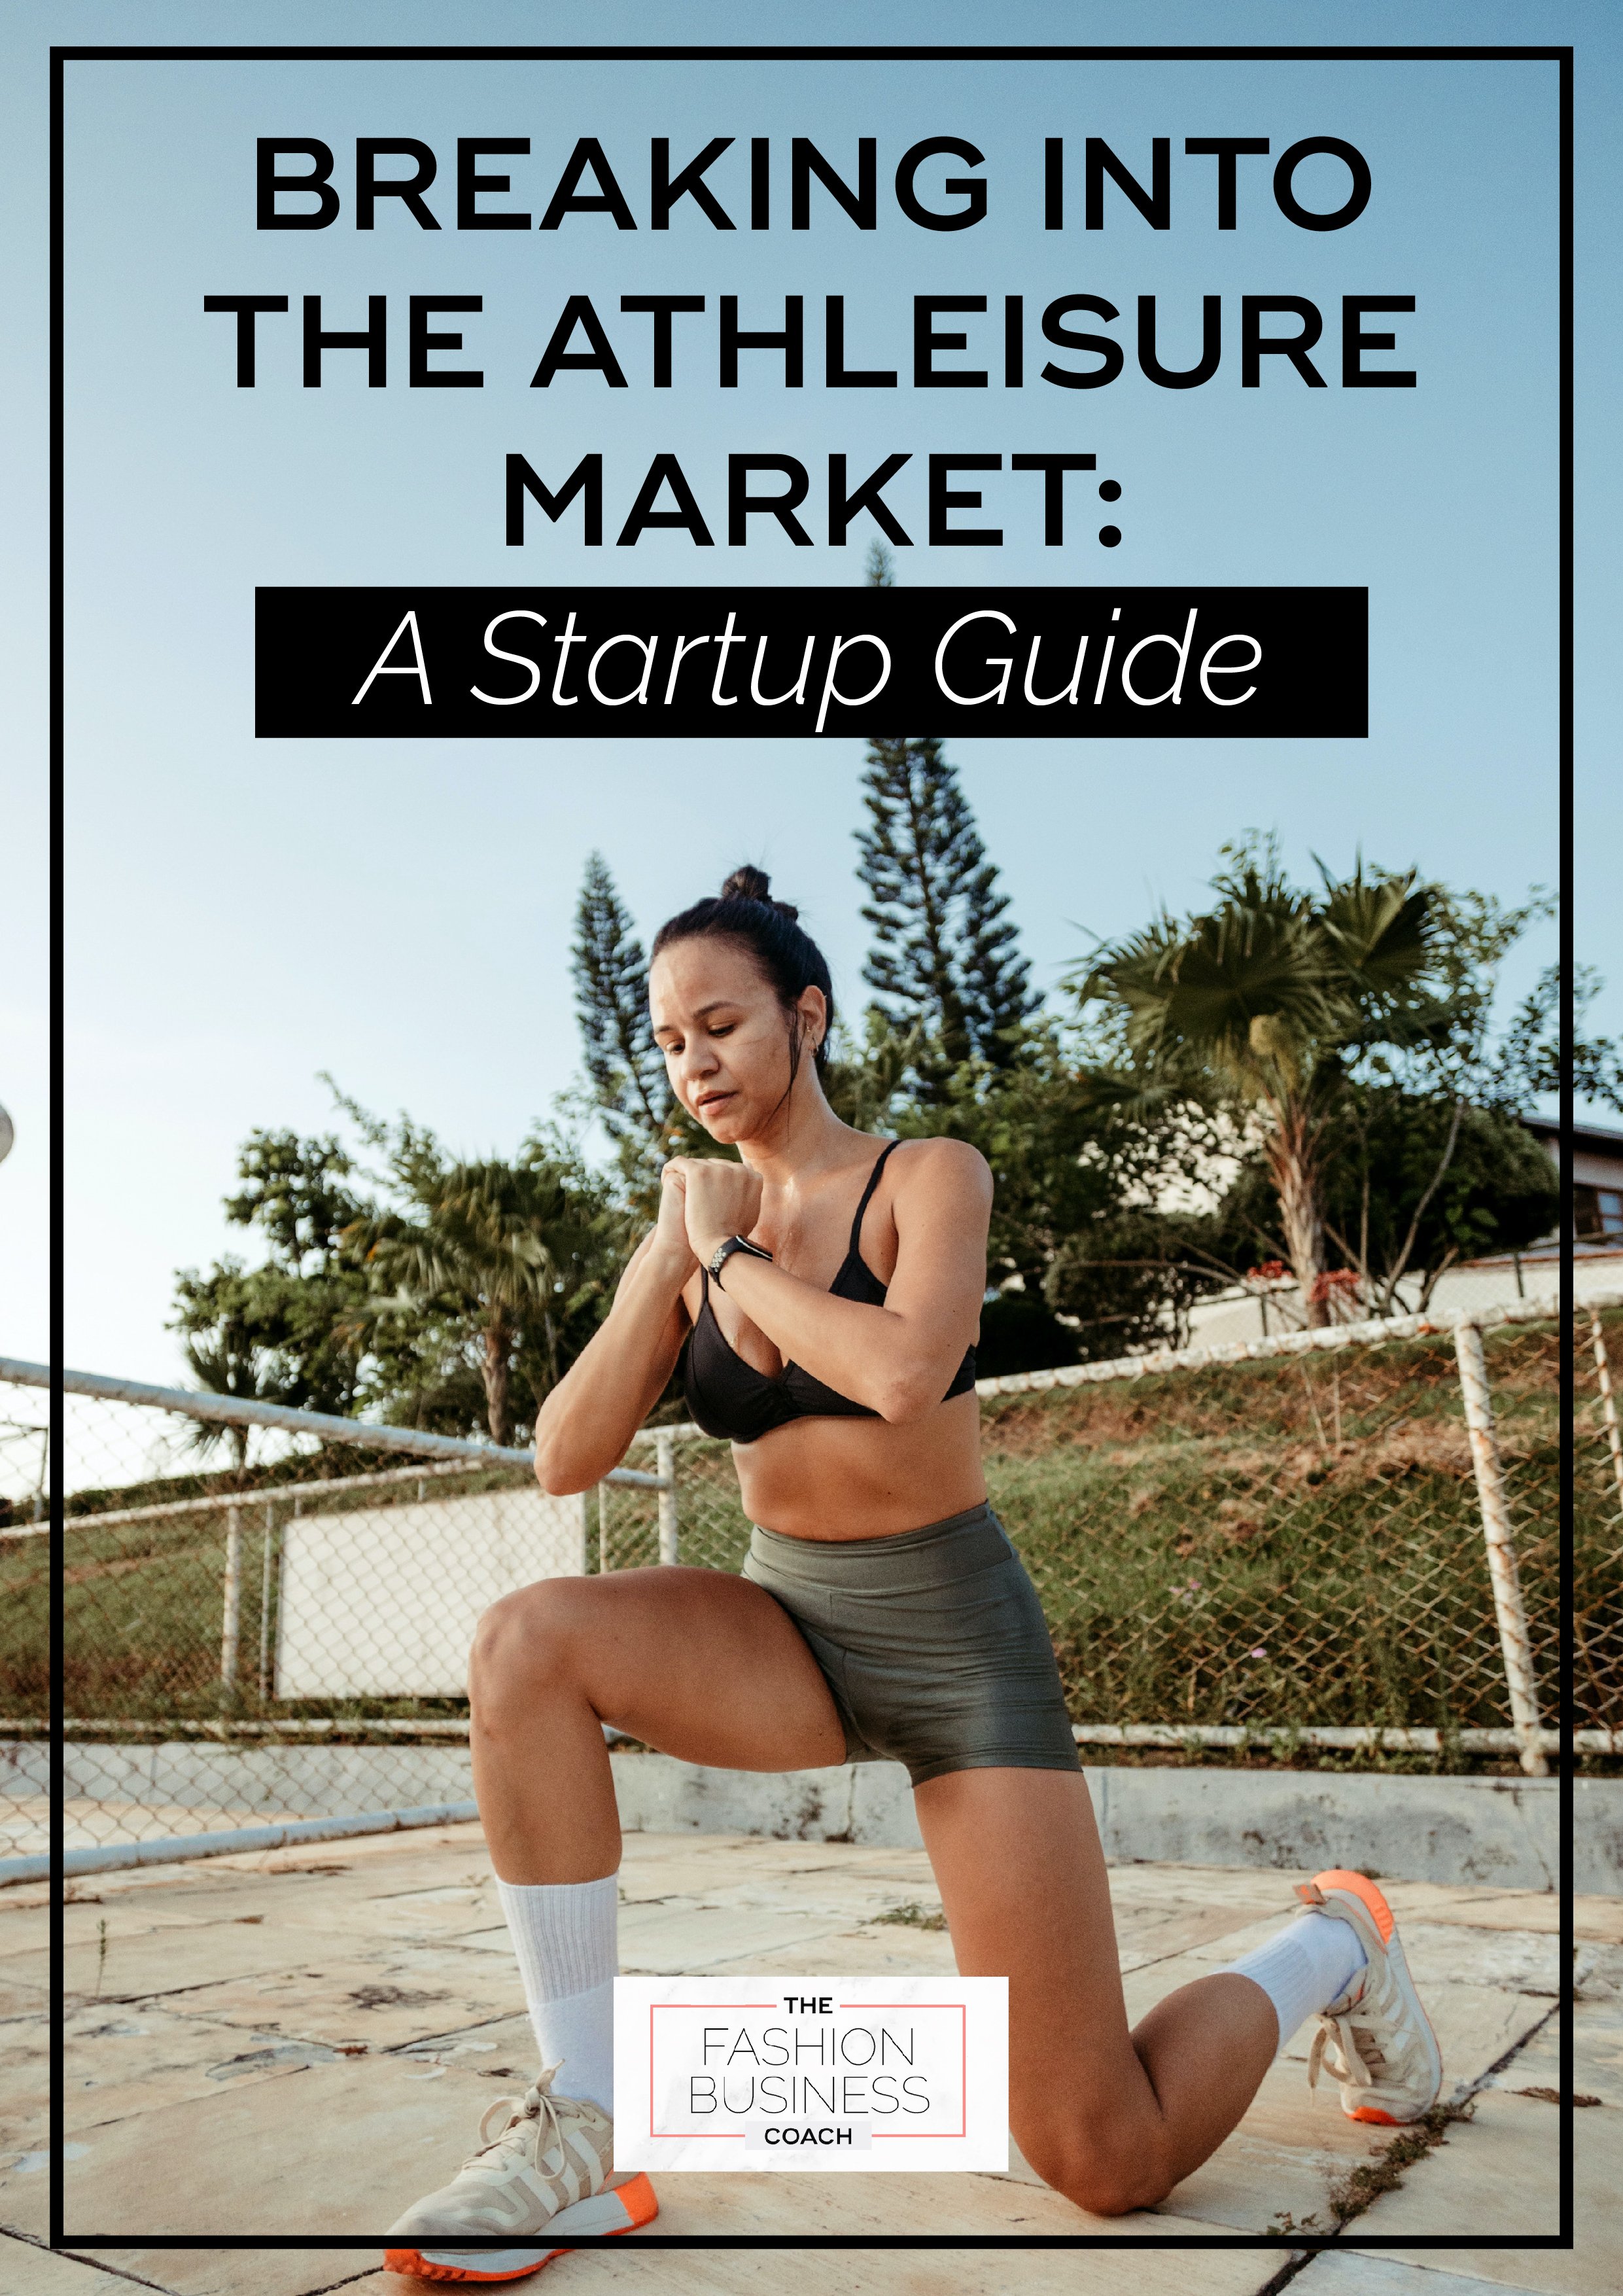 Pinterest_Breaking into the Athleisure Market- A Startup Guide 2.jpg